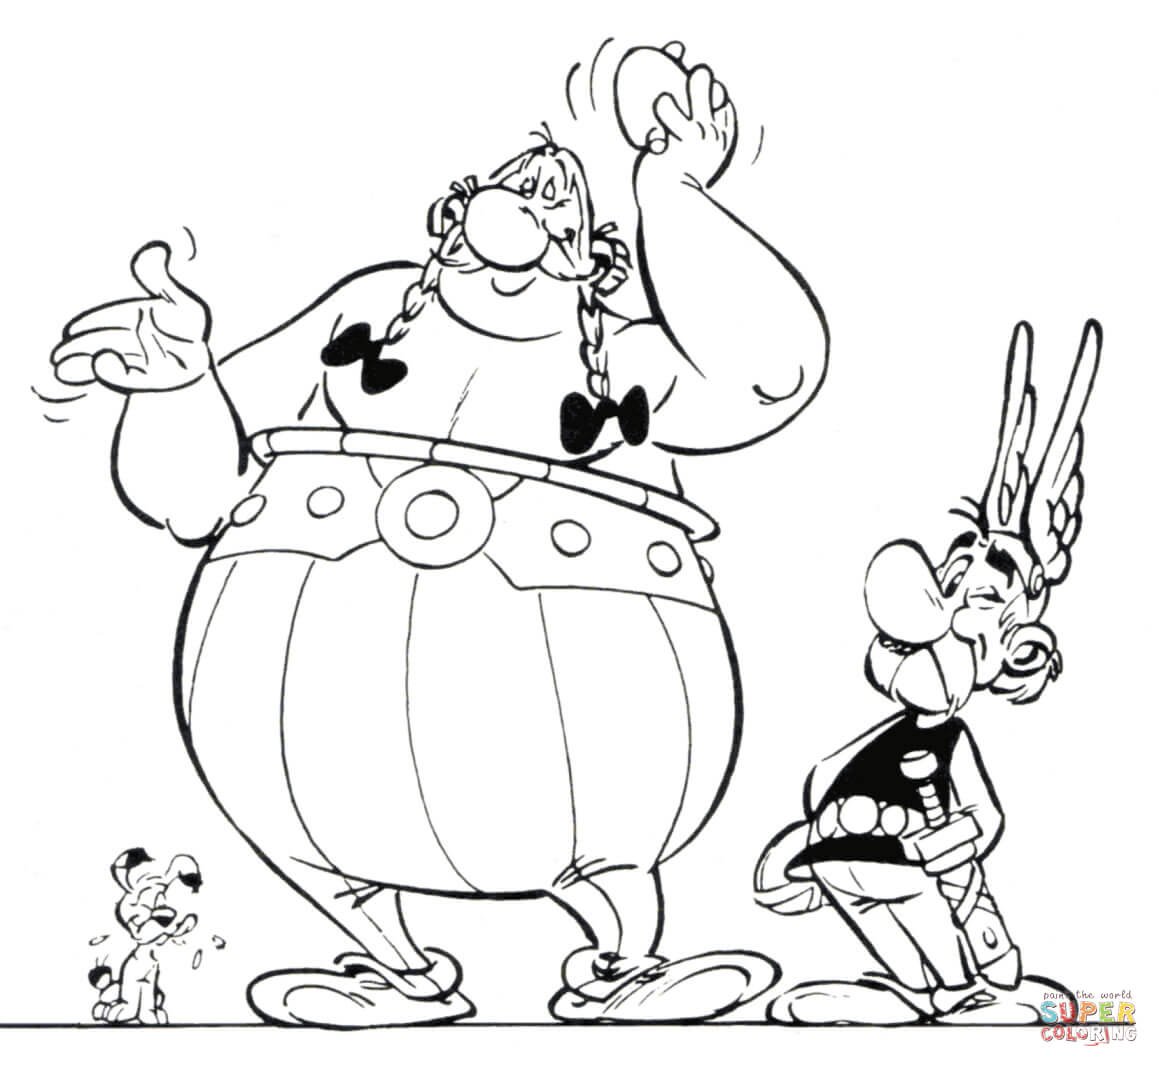 Asterix And Obelix Coloring Pages - Coloring Home